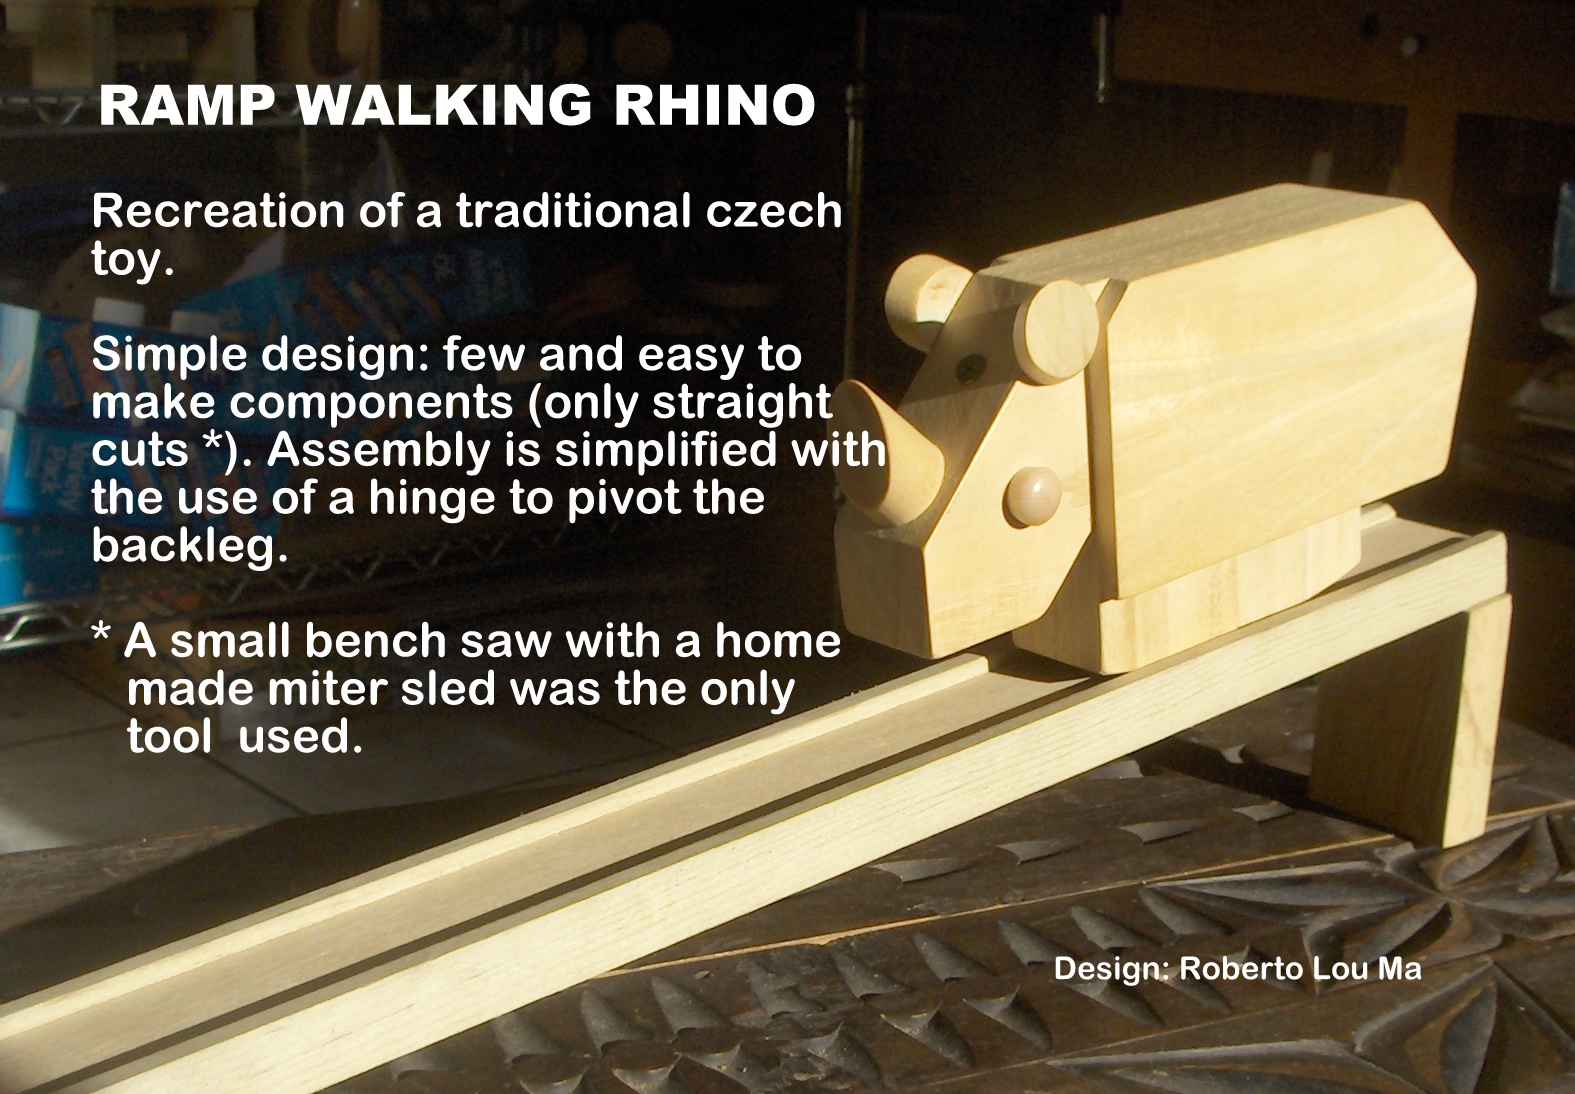 Free plans for a ramp-walking wooden rhino toy